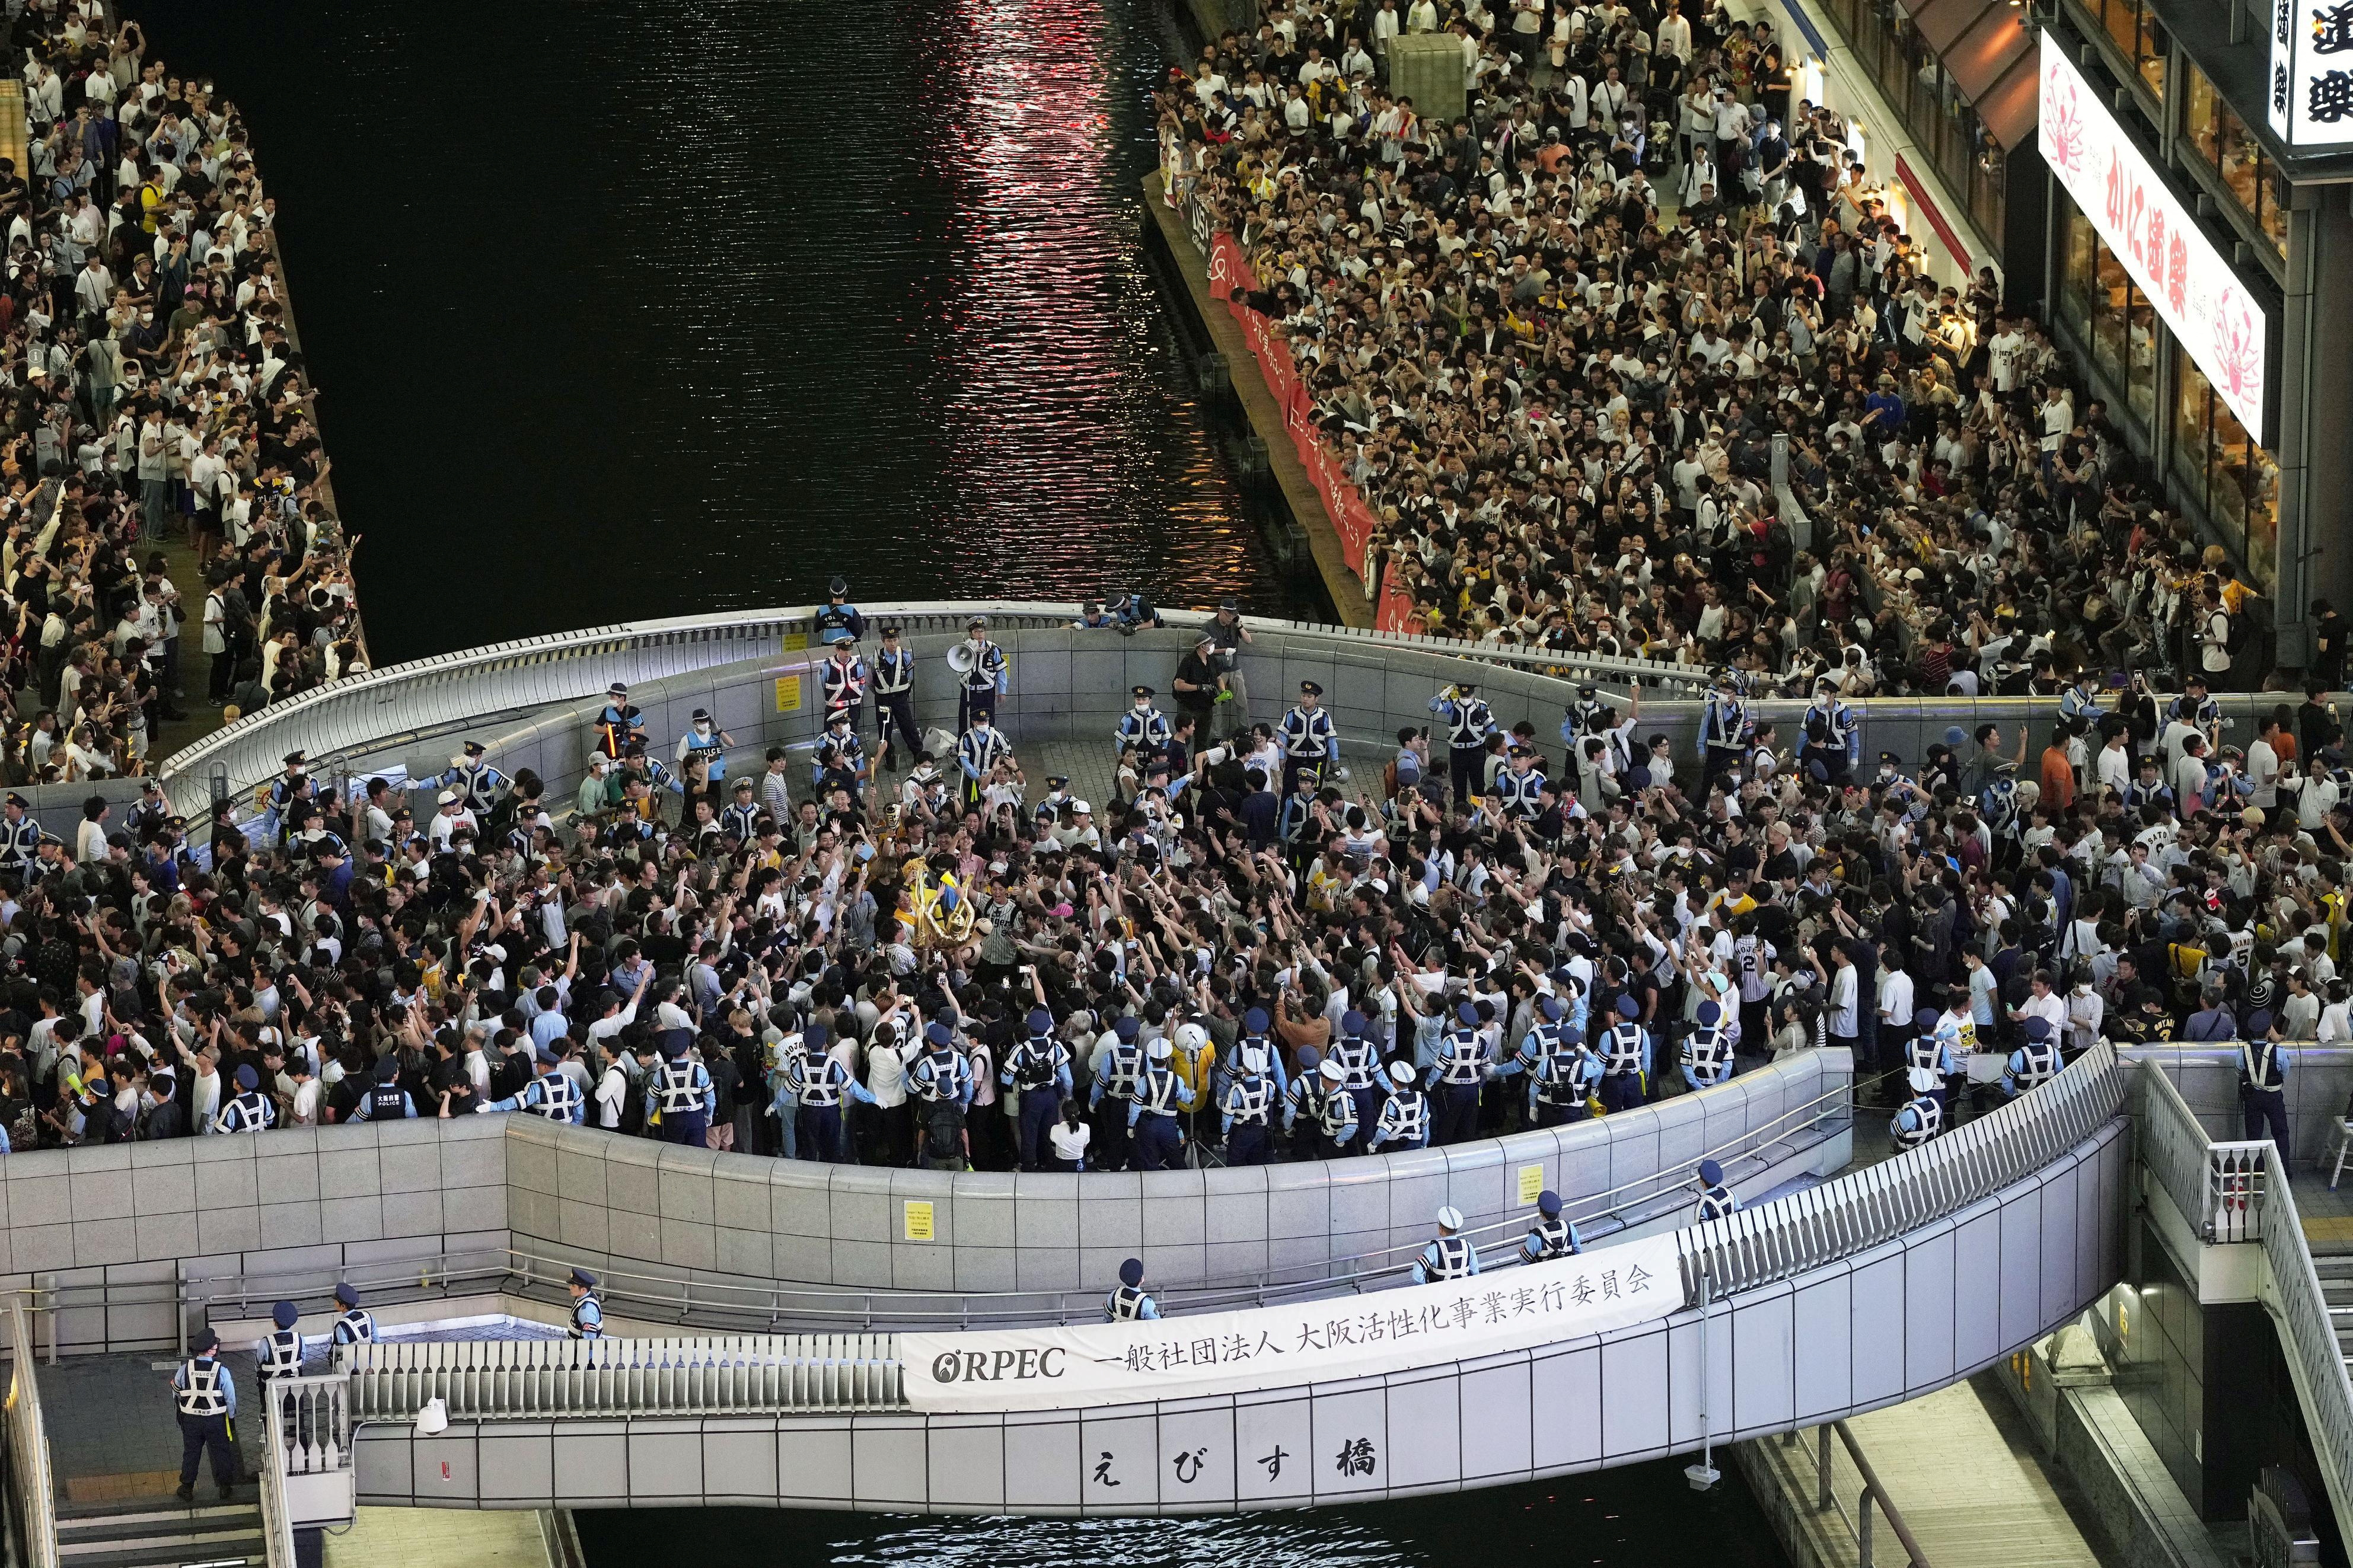 Tigers fans take it easy after pennant win in Japan